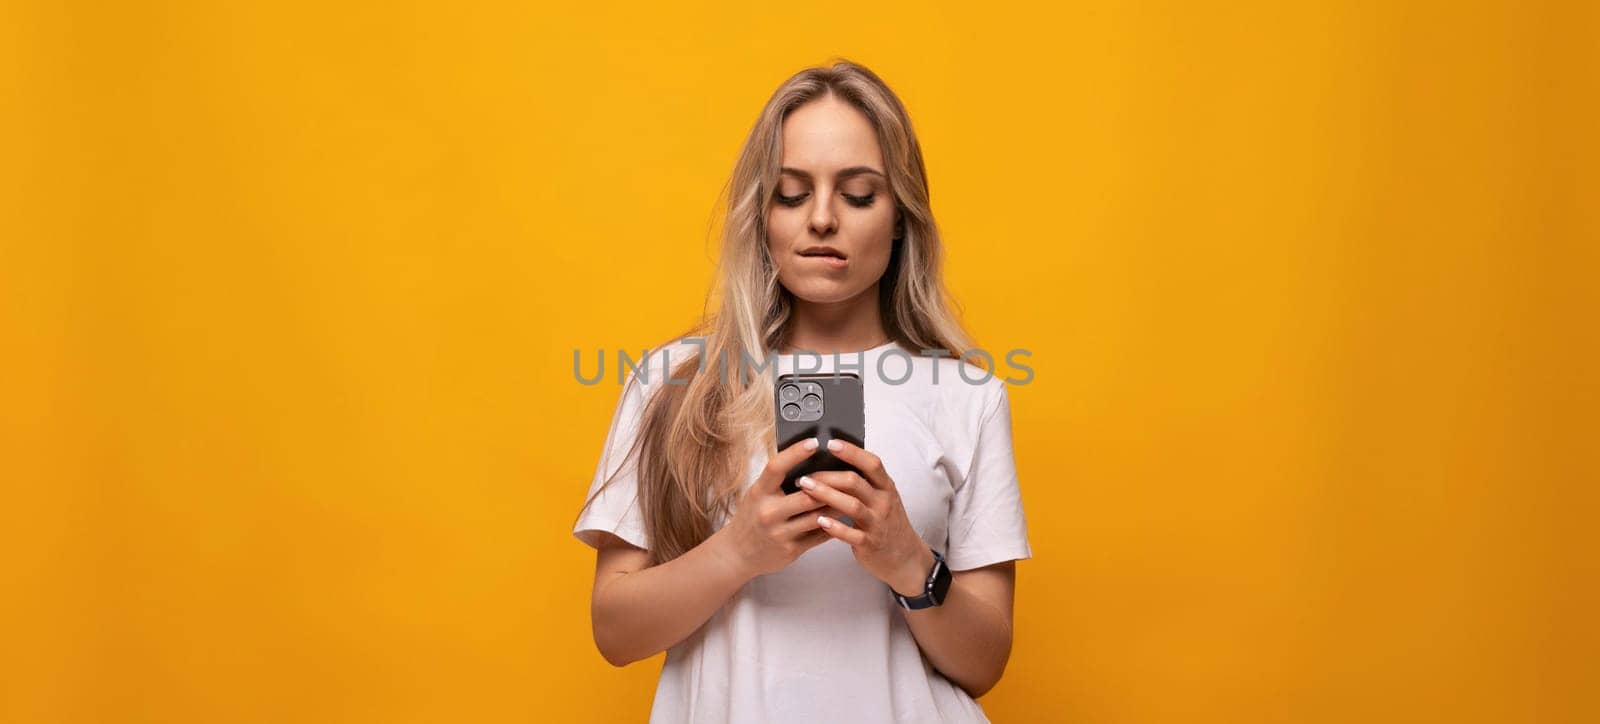 girl with a gadget sits on the Internet on an orange background by TRMK